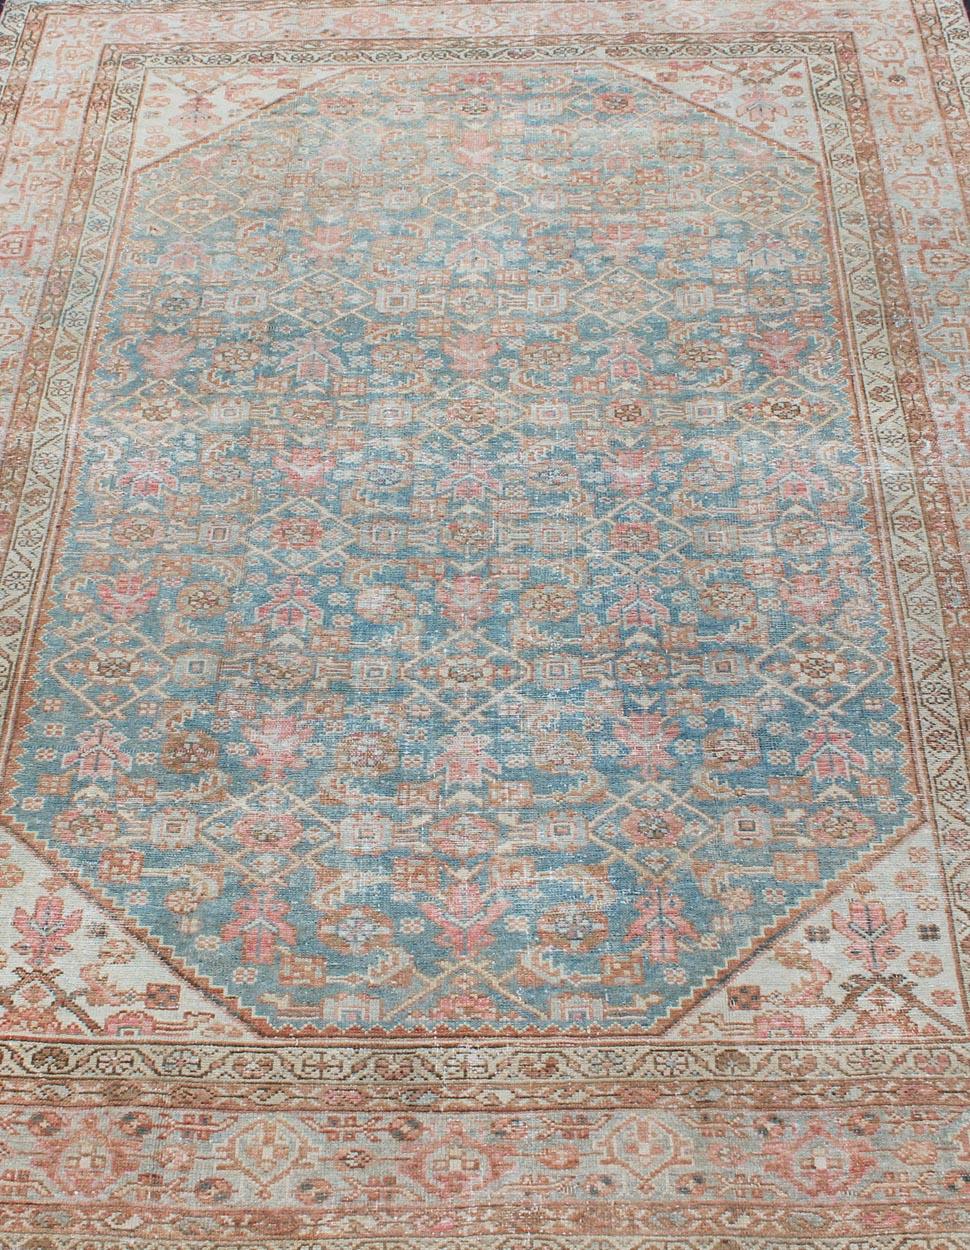 Antique Malayer Carpet with All-Over Design in Blue Gray Tones For Sale 5